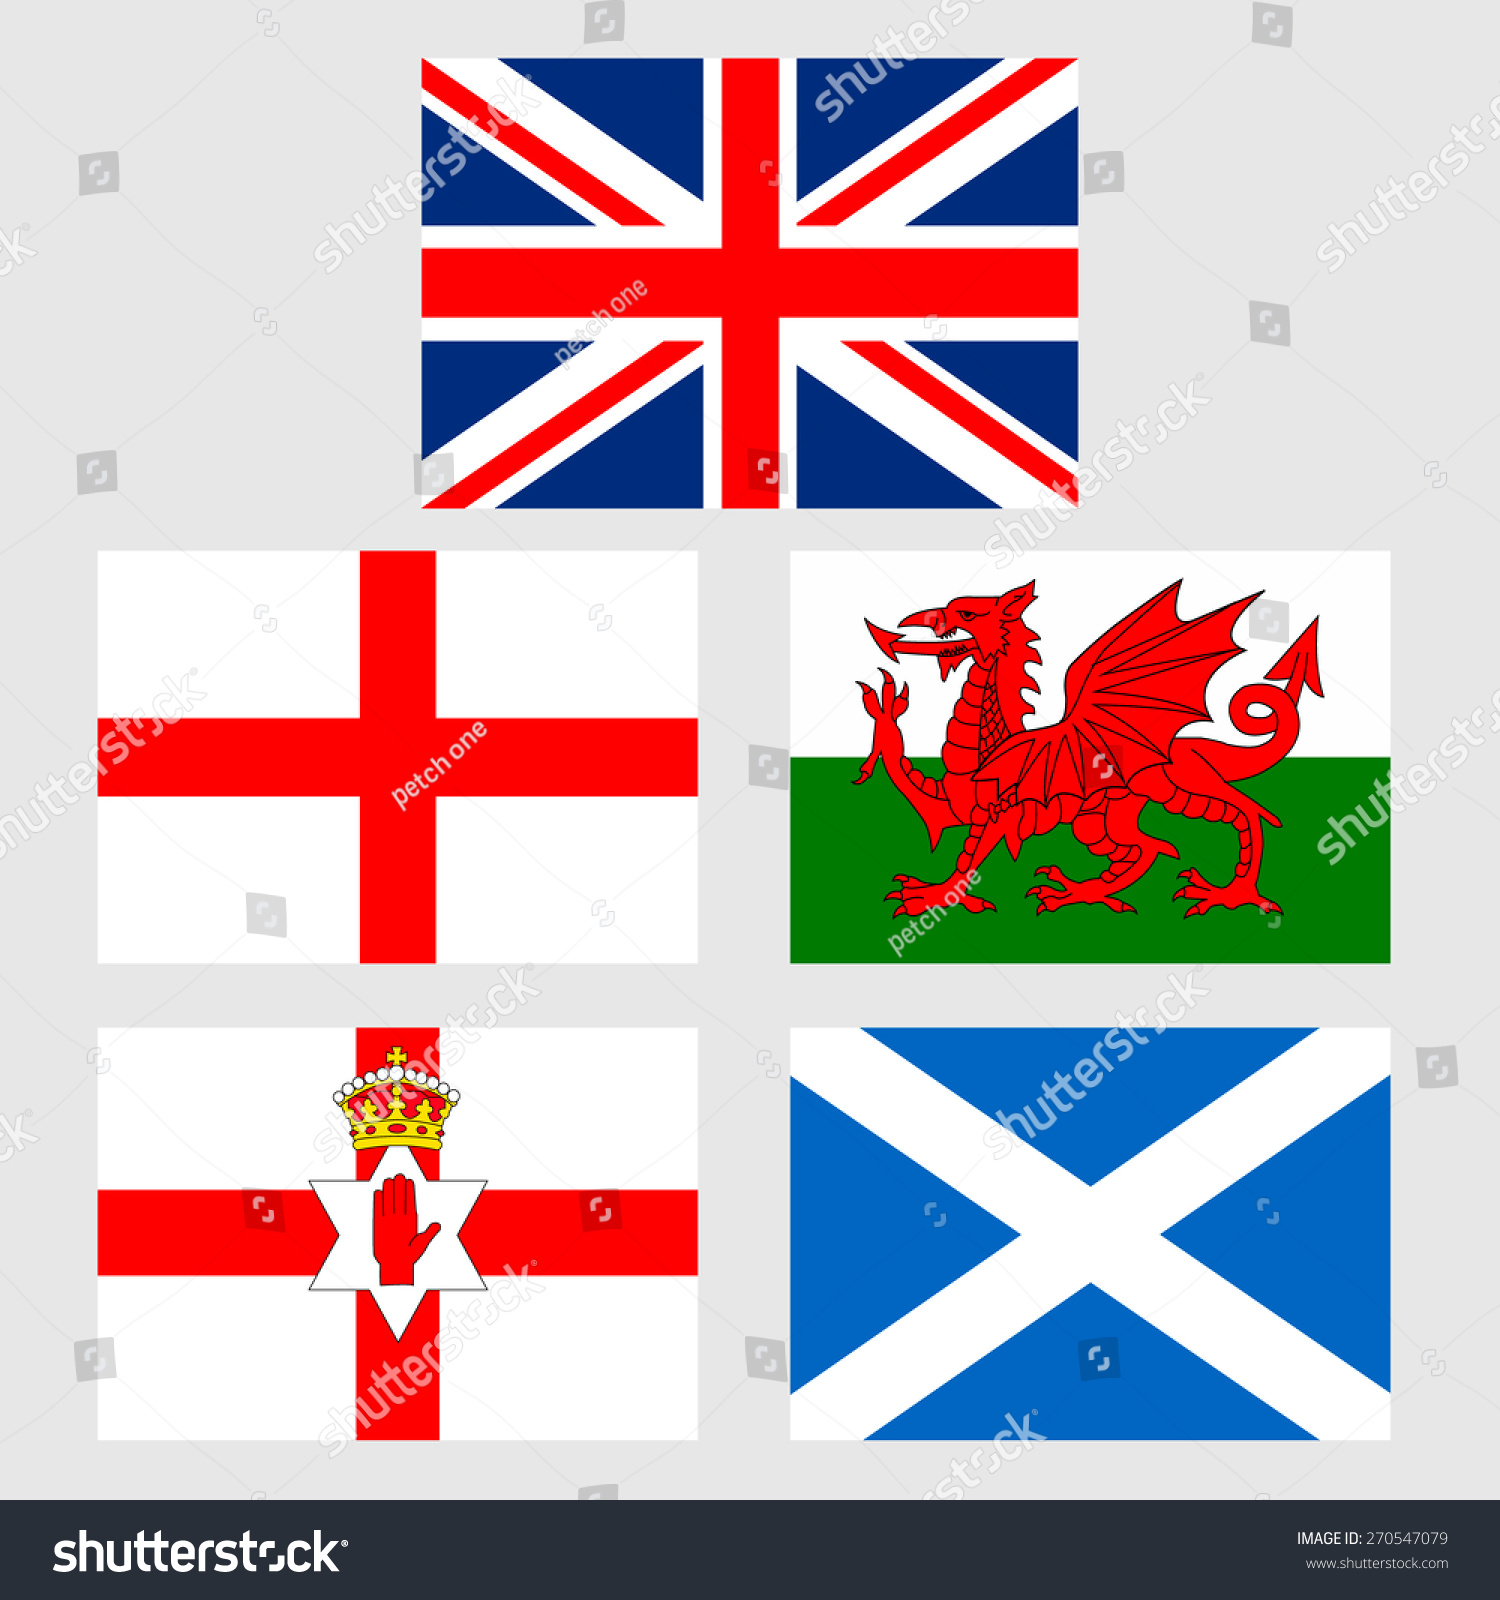 United Kingdom Collection Of Flags And National Emblems Of England ...